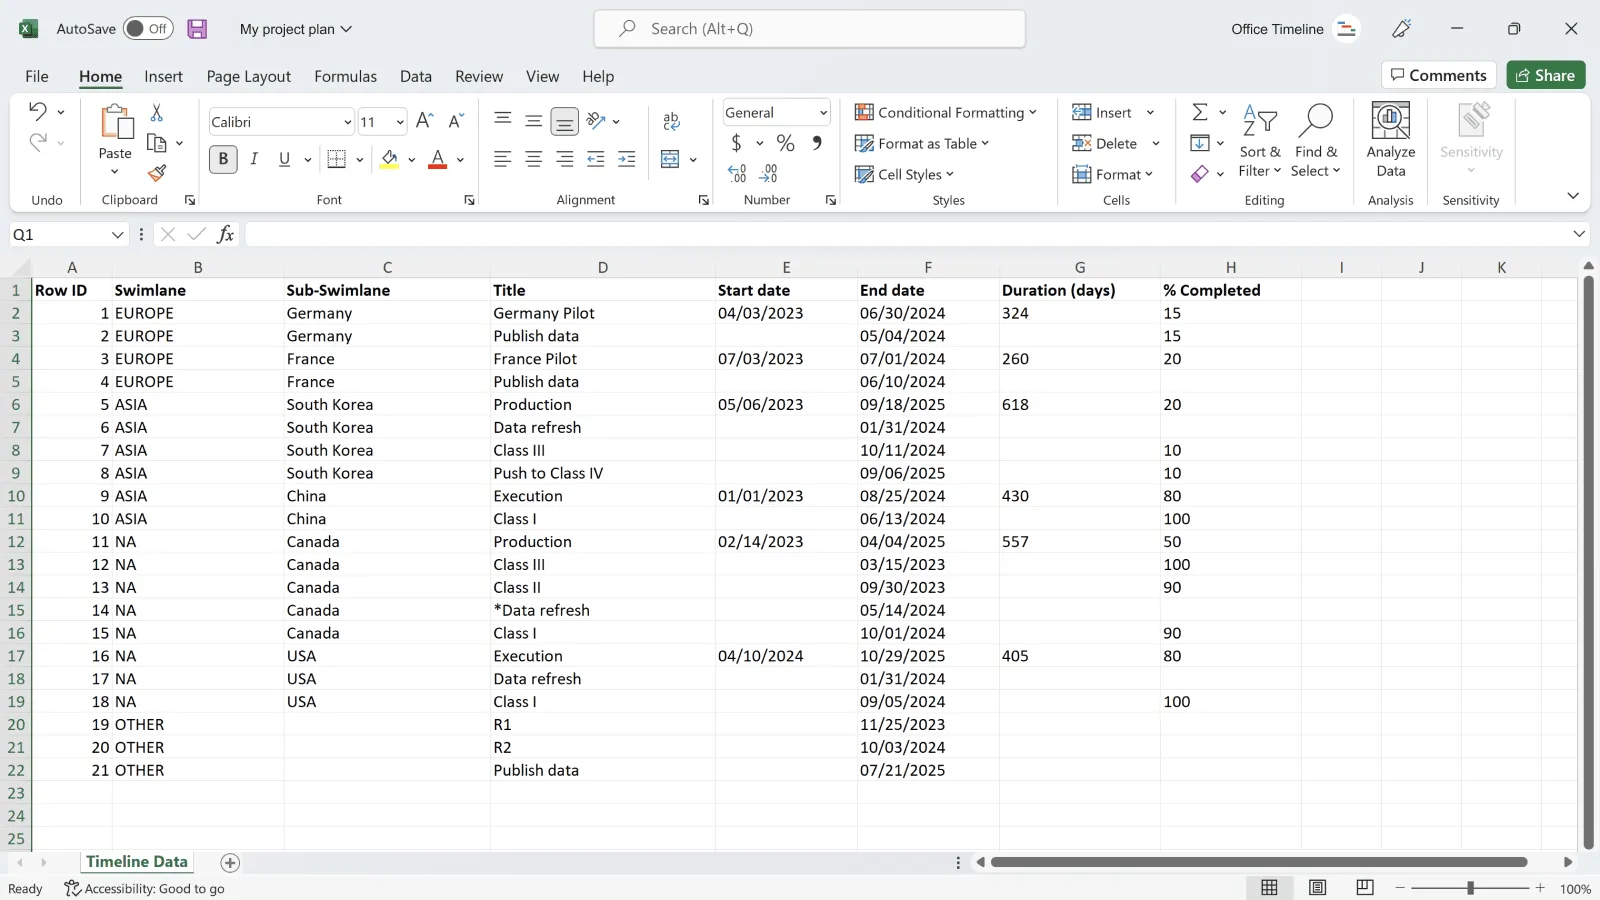 Project data in Excel before importing into Office Timeline Expert